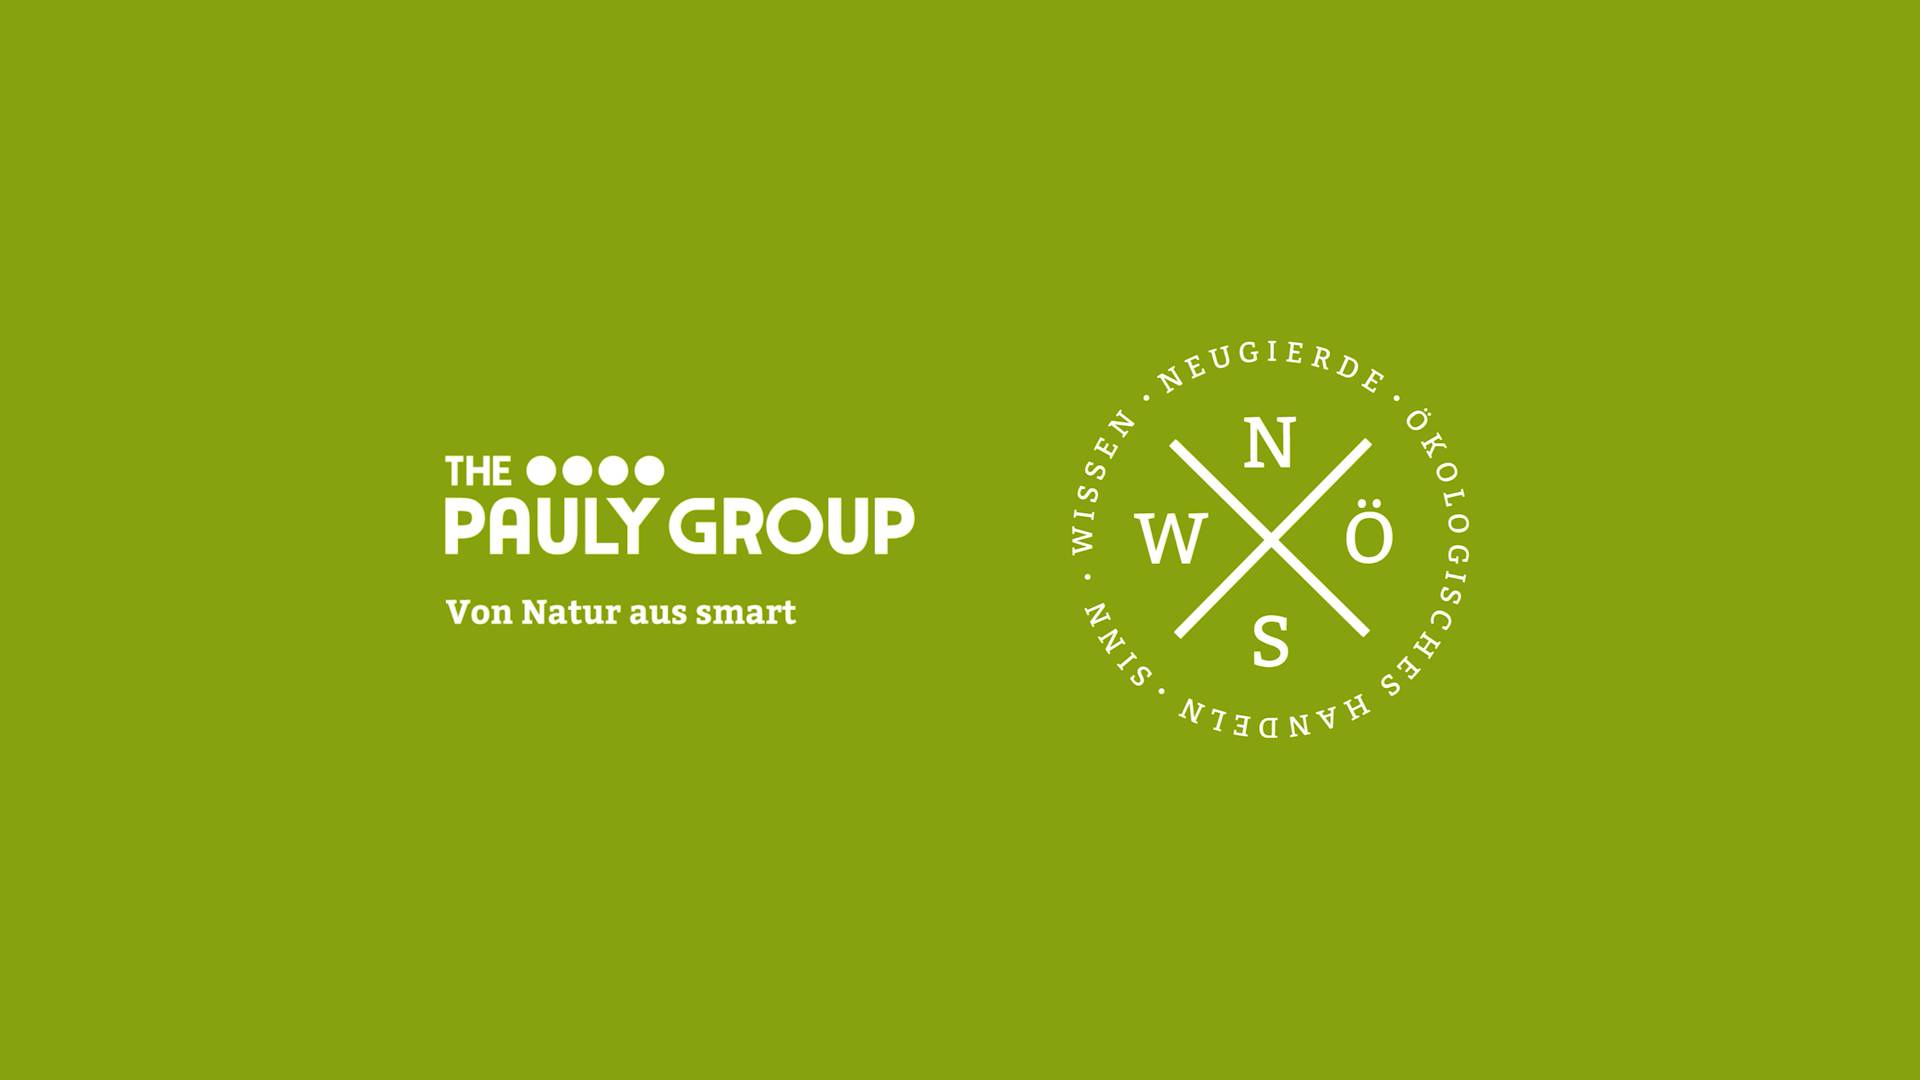 Wir sind THE PAULY GROUP